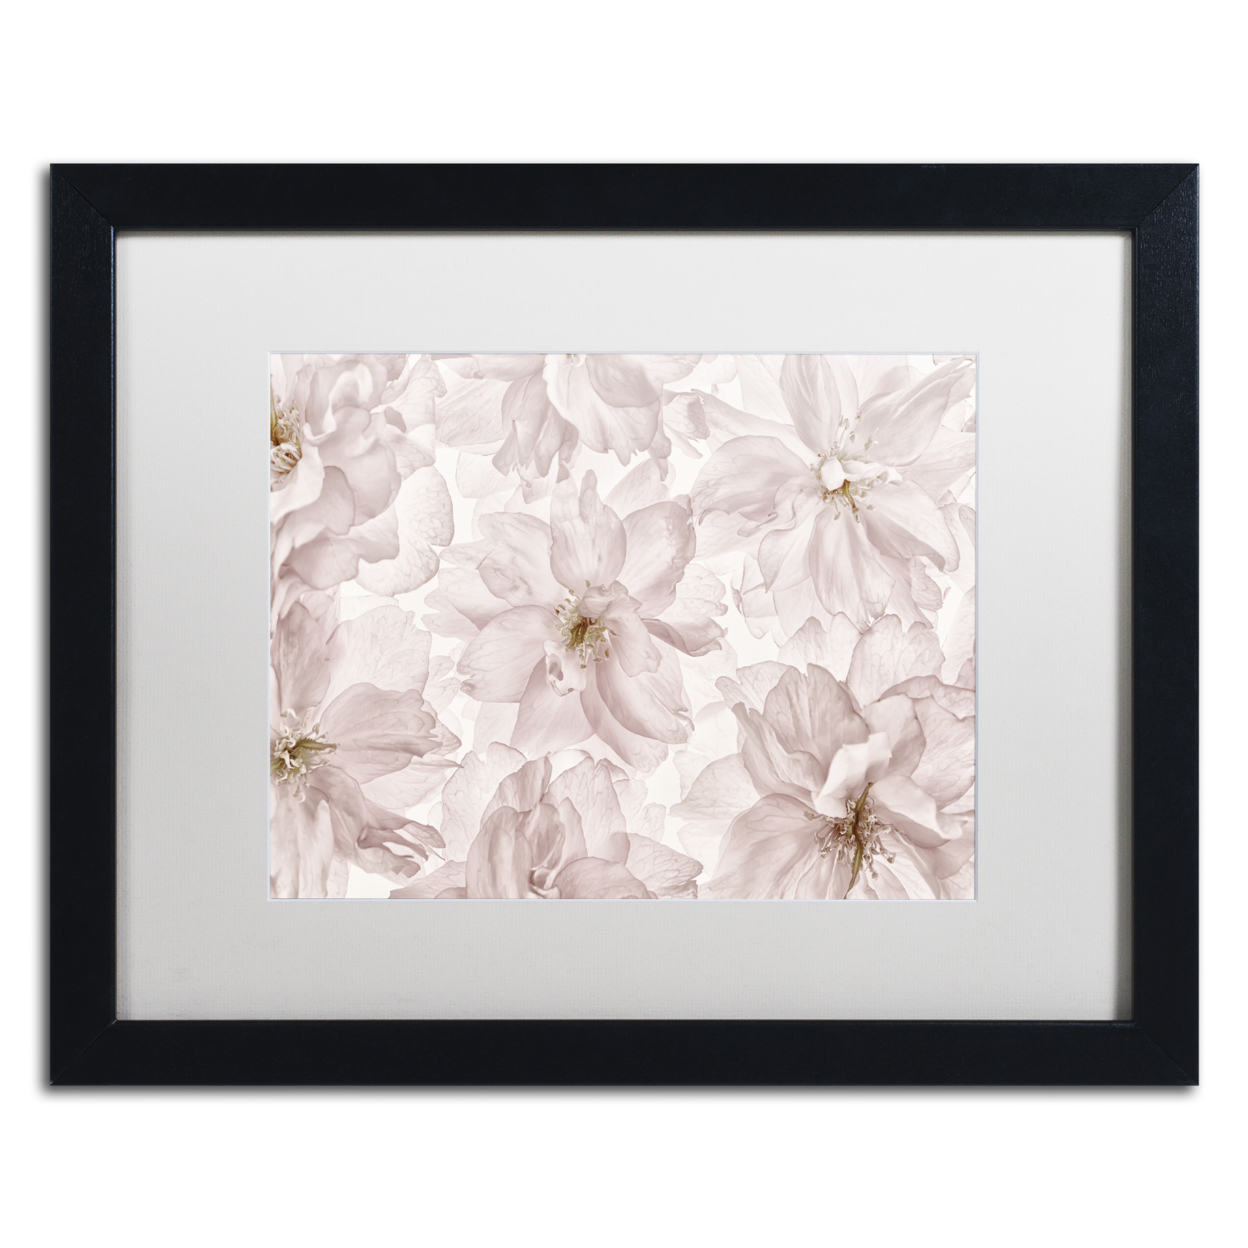 Cora Niele 'Translucent Cherry Blossom' Black Wooden Framed Art 18 X 22 Inches